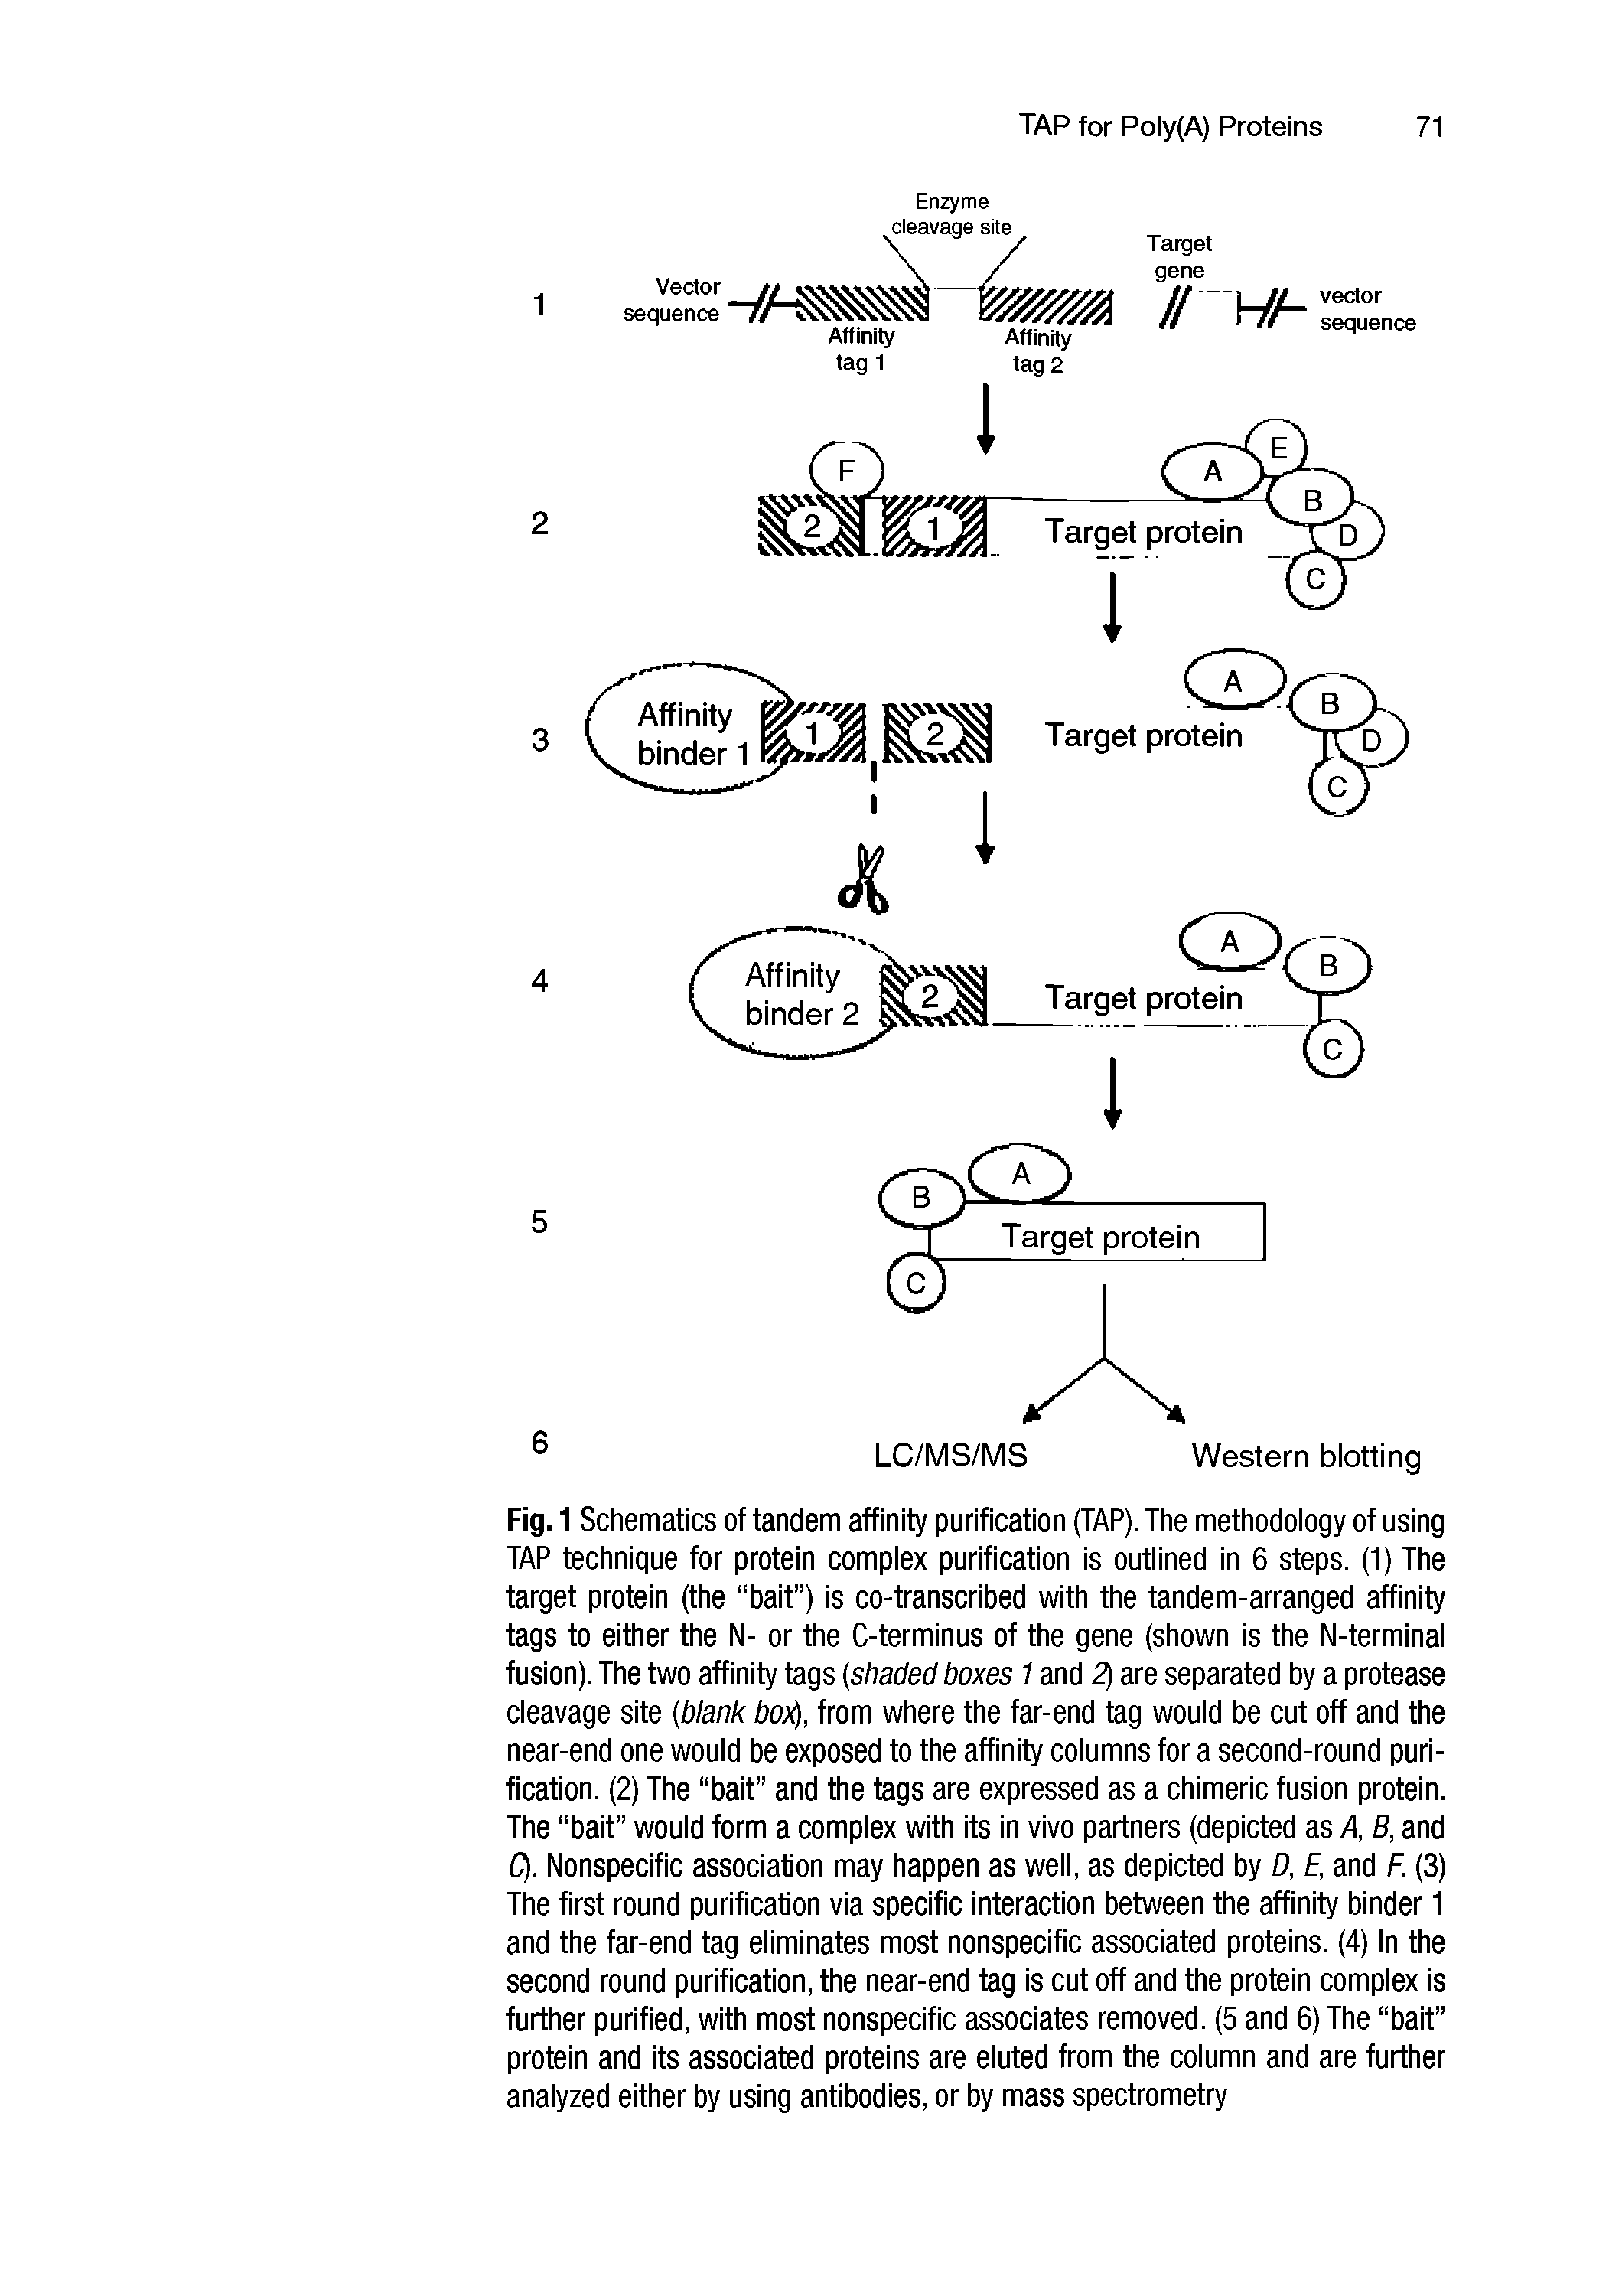 Fig. 1 Schematics of tandem affinity purification (TAP). The methodology of using TAP technique for protein complex purification is outlined in 6 steps. (1) The target protein (the bait ) is co-transcribed with the tandem-arranged affinity tags to either the N- or the C-terminus of the gene (shown is the N-terminal fusion). The two affinity tags (shaded boxes 1 and 2j are separated by a protease cleavage site (blank bo)(j, from where the far-end tag would be cut off and the near-end one would be exposed to the affinity columns for a second-round purification. (2) The bait and the tags are expressed as a chimeric fusion protein. The bait would form a complex with its in vivo partners (depicted as A, B, and Q. Nonspecific association may happen as well, as depicted by D, E, and F. (3) The first round purification via specific interaction between the affinity binder 1 and the far-end tag eliminates most nonspecific associated proteins. (4) In the second round purification, the near-end tag is cut off and the protein complex is further purified, with most nonspecific associates removed. (5 and 6) The bait protein and its associated proteins are eluted from the column and are further analyzed either by using antibodies, or by mass spectrometry...